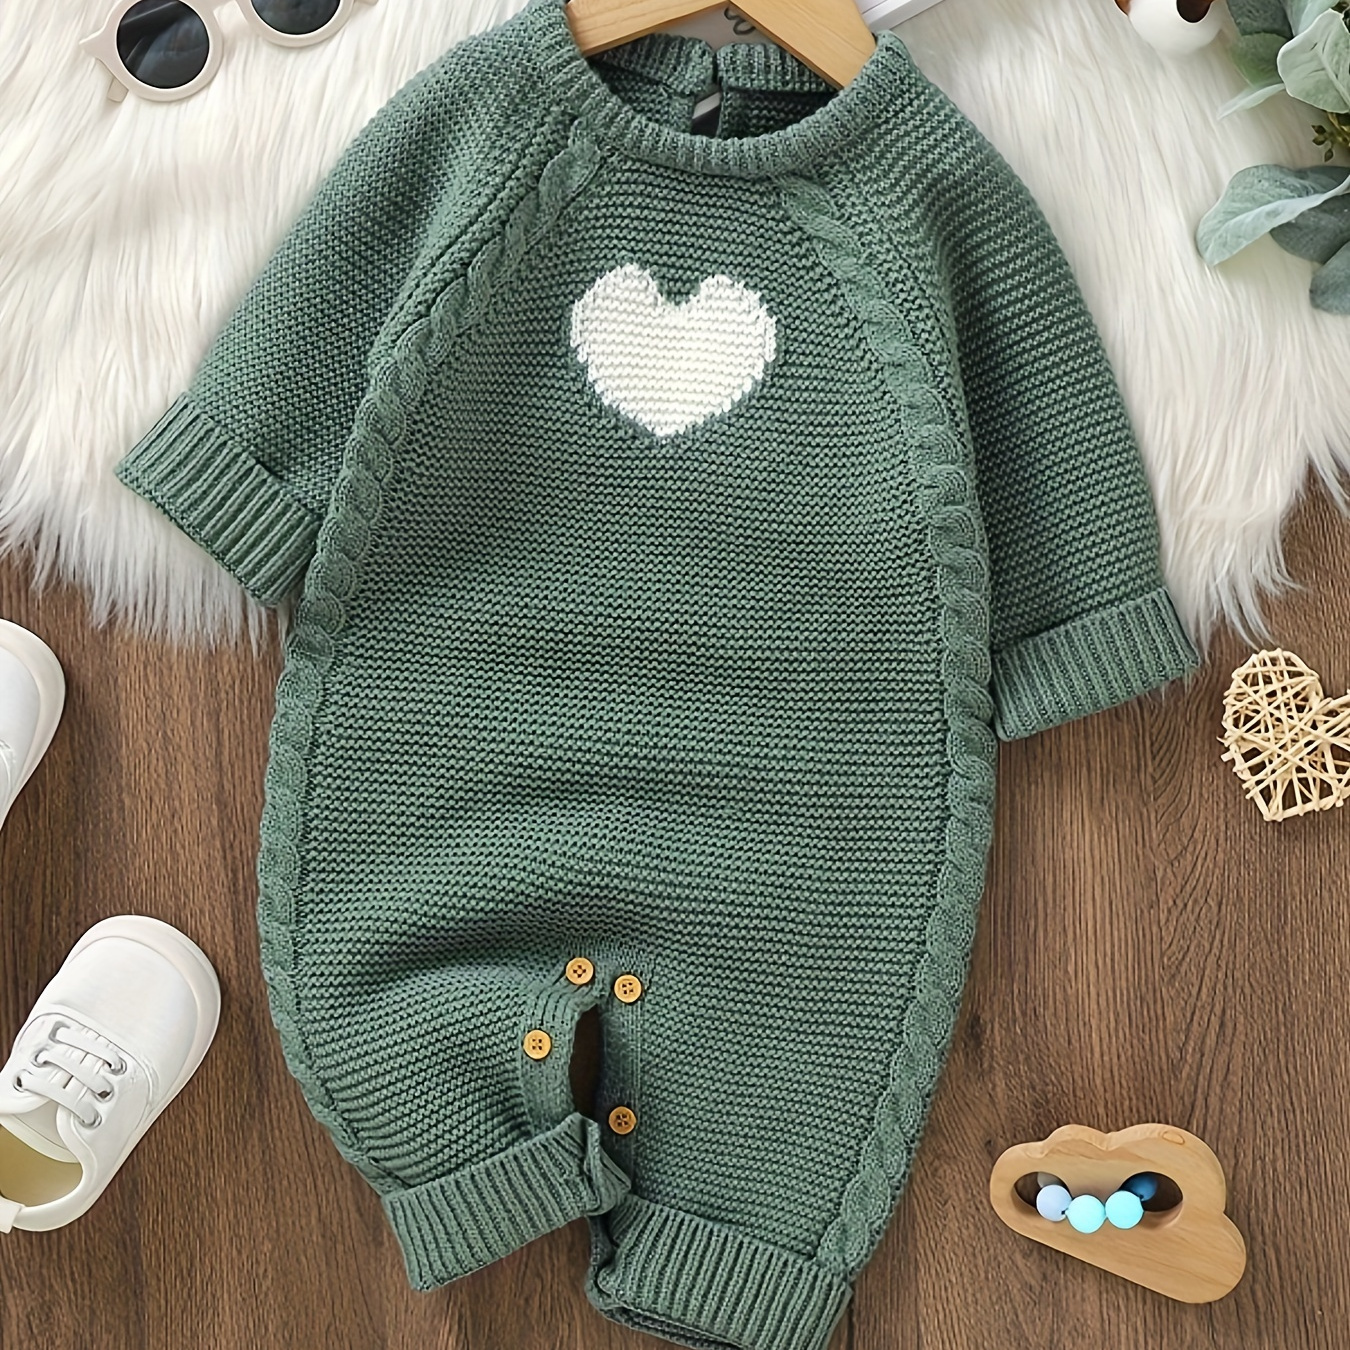 

Baby Boy's Heart Jacquard Cable Knit Bodysuit, Comfy Long Sleeve Onesie, Infant's Clothing, As Gift